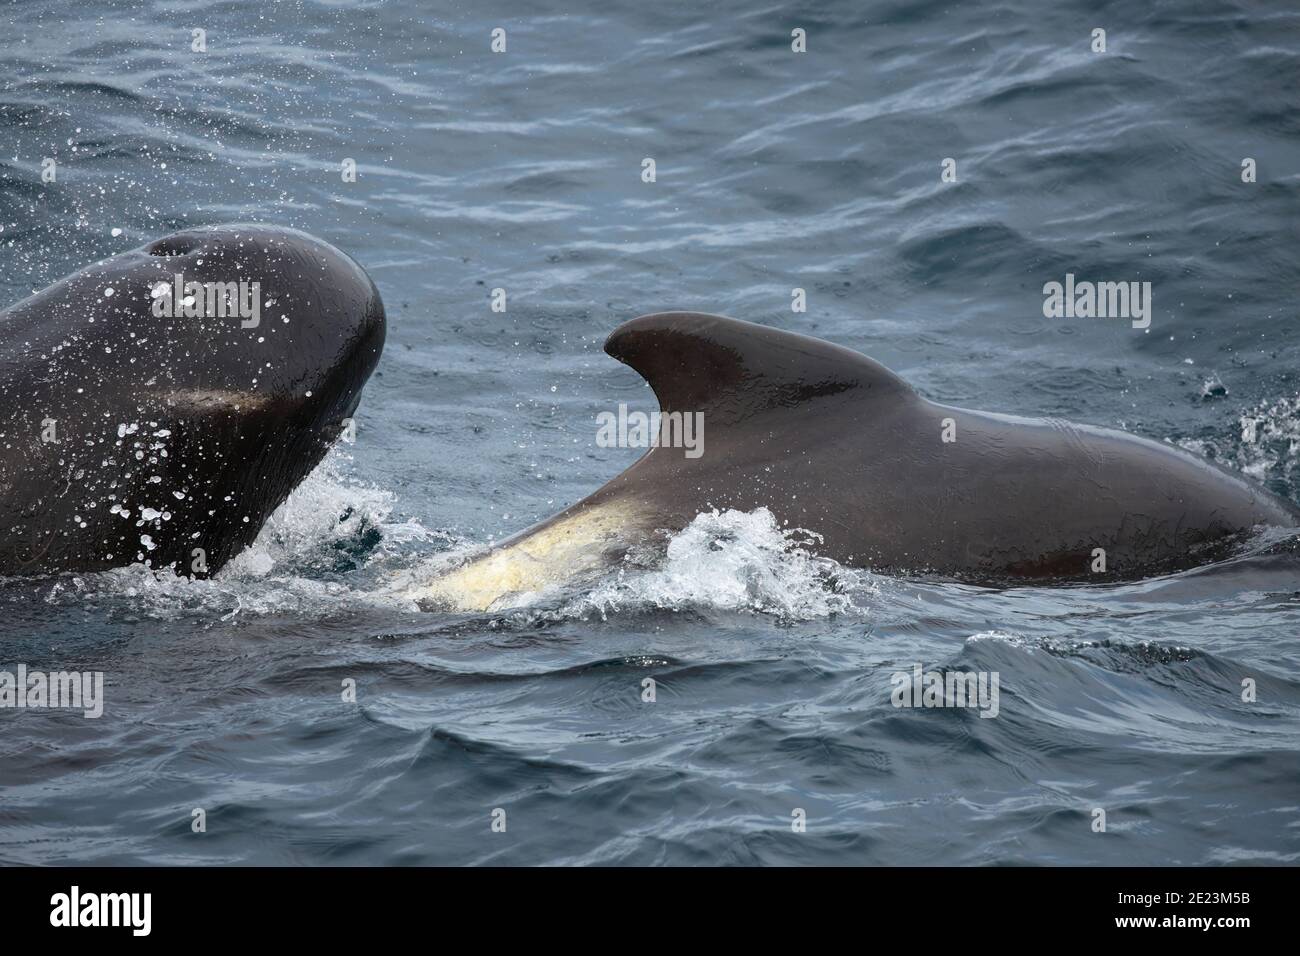 Long-finned Pilot Whale (Globicephalus melas) at sea surface, viewed from above, South Atlantic Ocean 2nd Dec 2015 Stock Photo